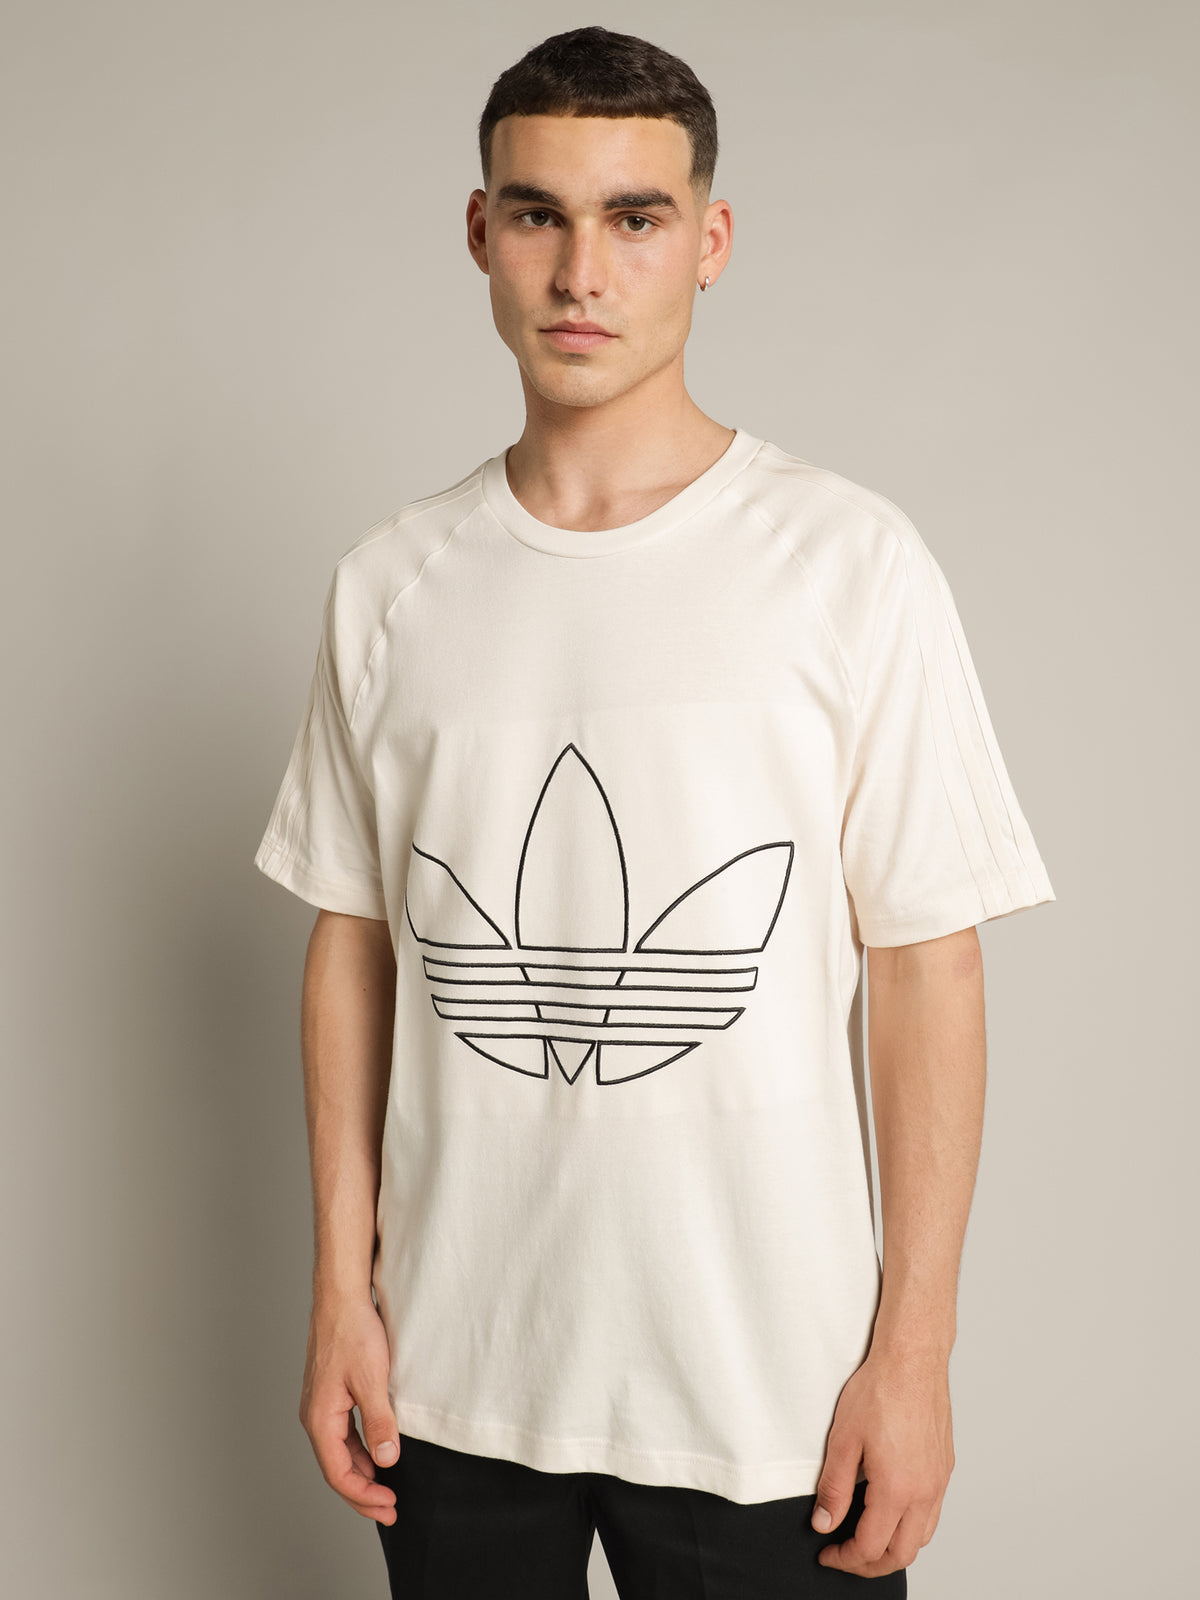 Graphics Tricolor T-Shirt in Wonder White